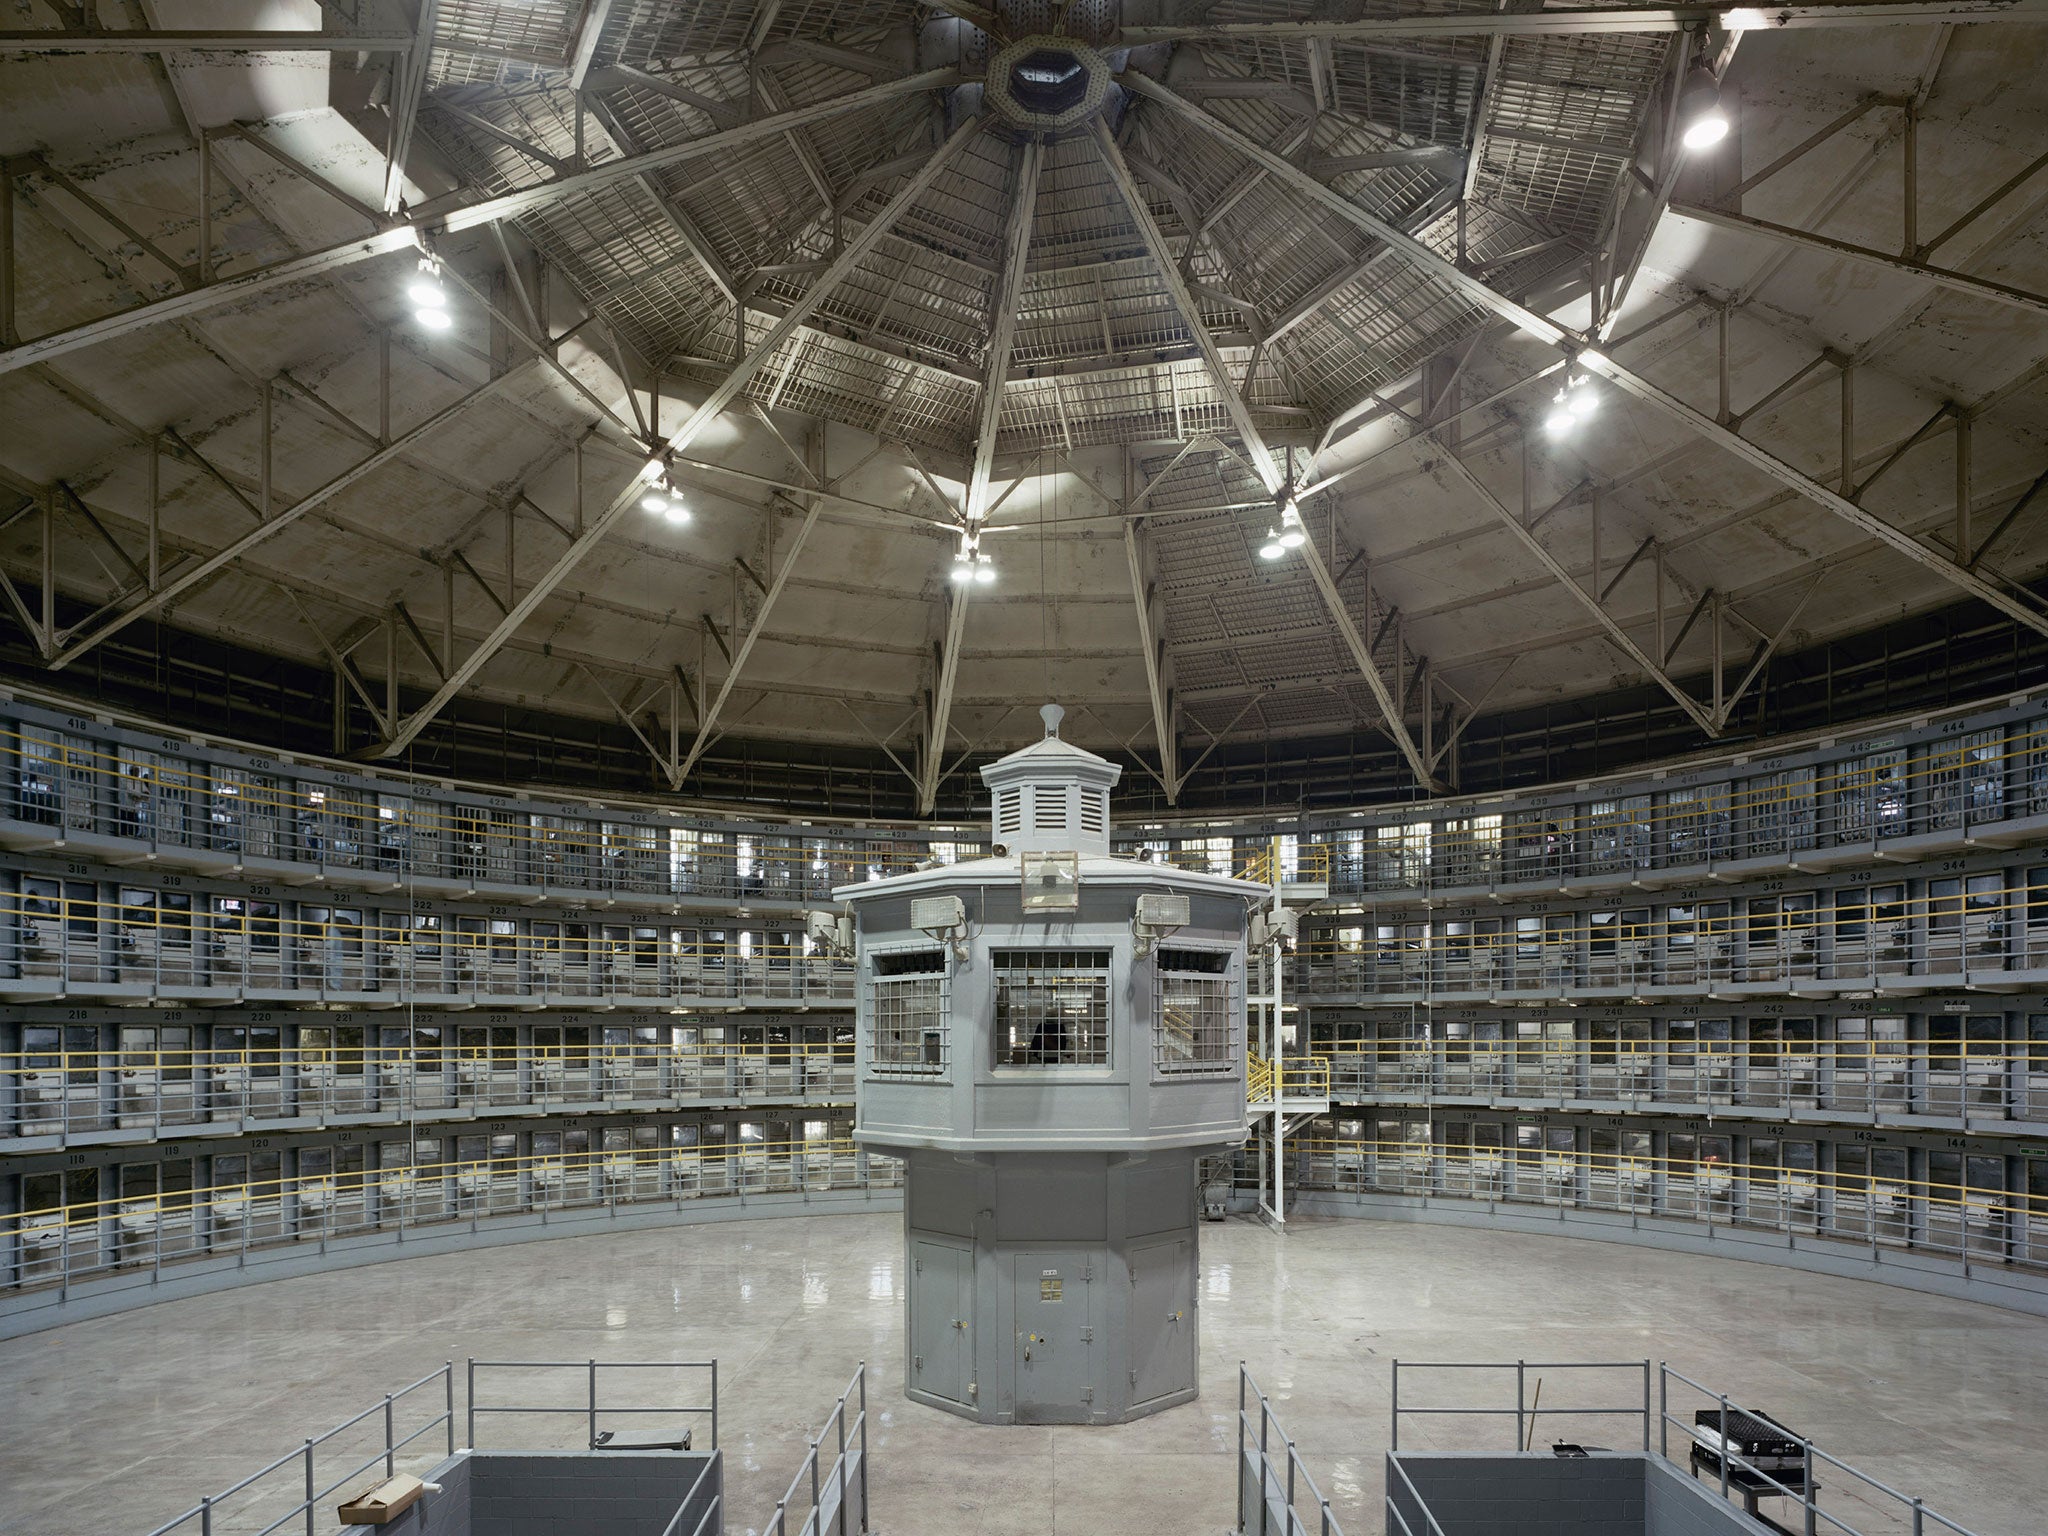 Tracking employees’ movements brings to mind Bentham’s Panopticon idea of circular prisons with a single watchman